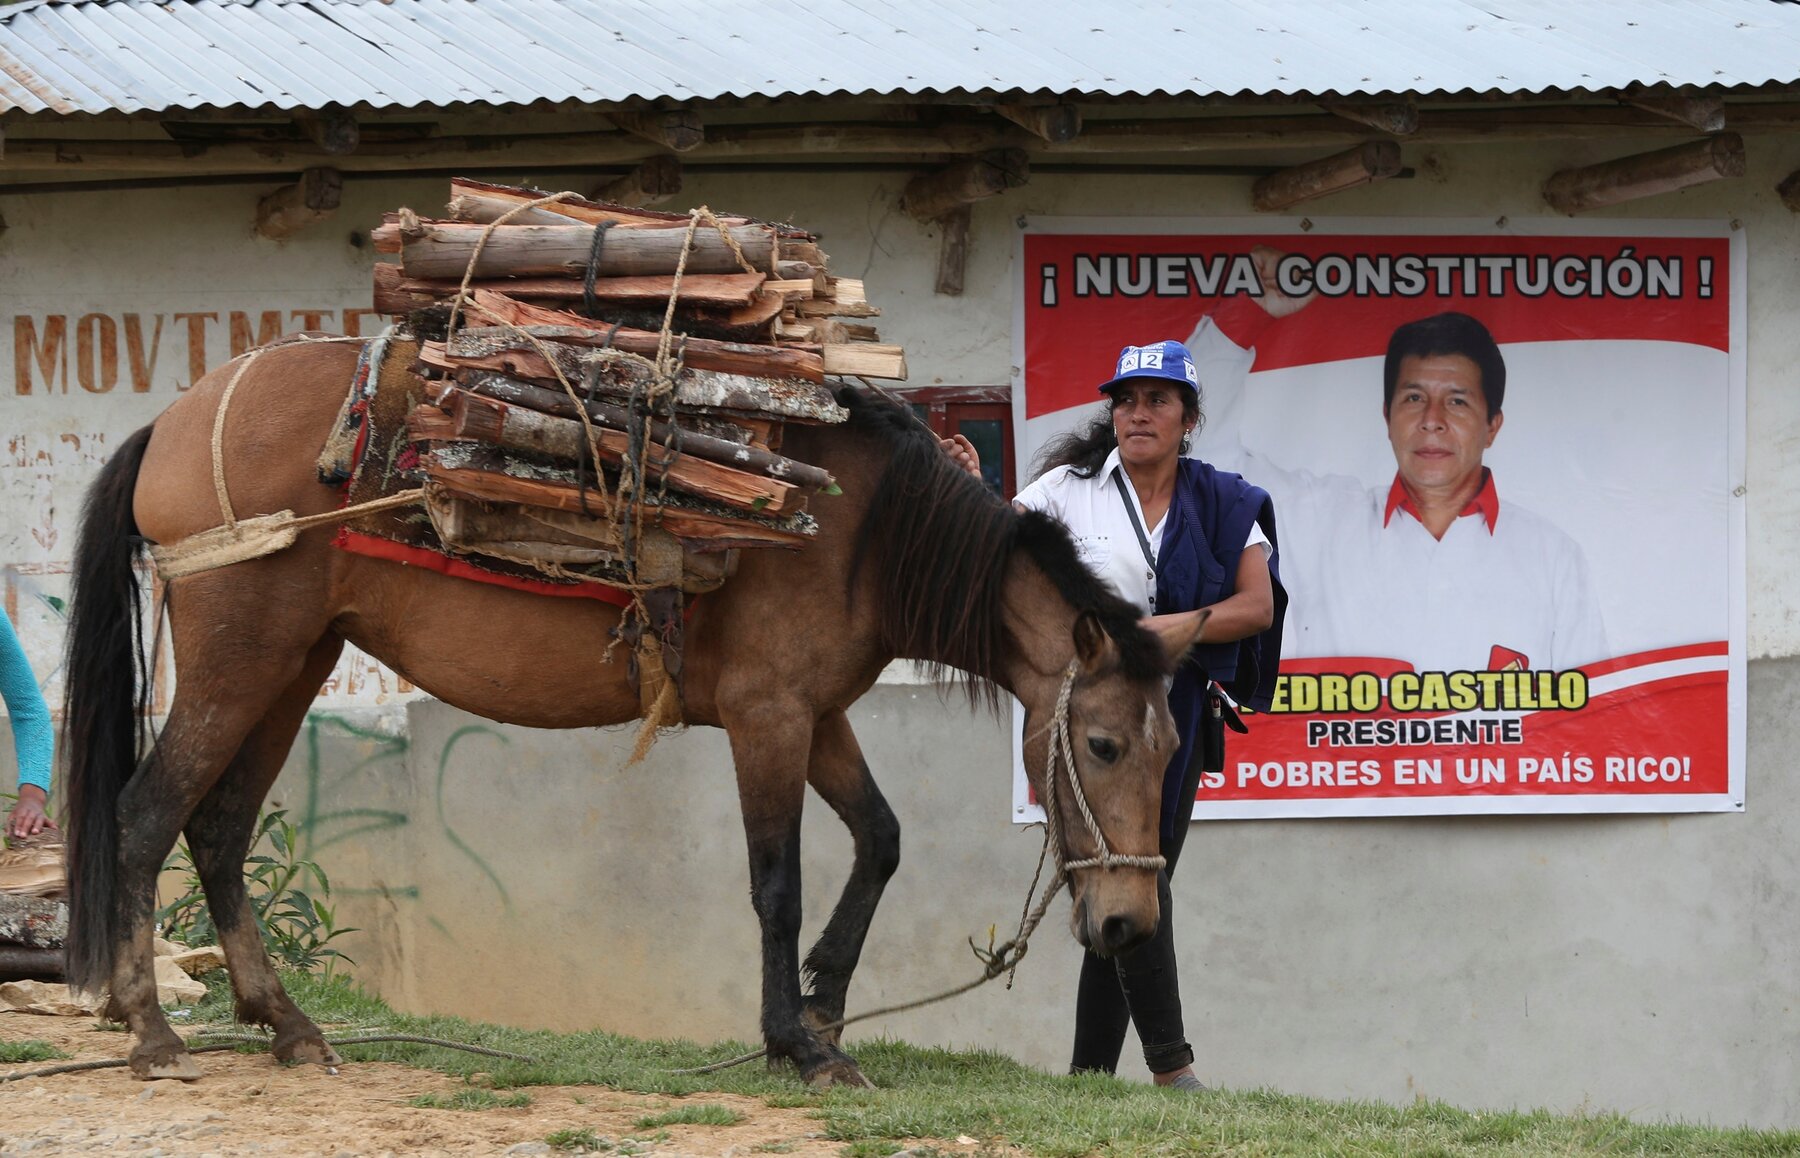 Peruvian in front of Pedro Castillo's election poster promising a new constitution (photo credit: AP / Martin Mejia)